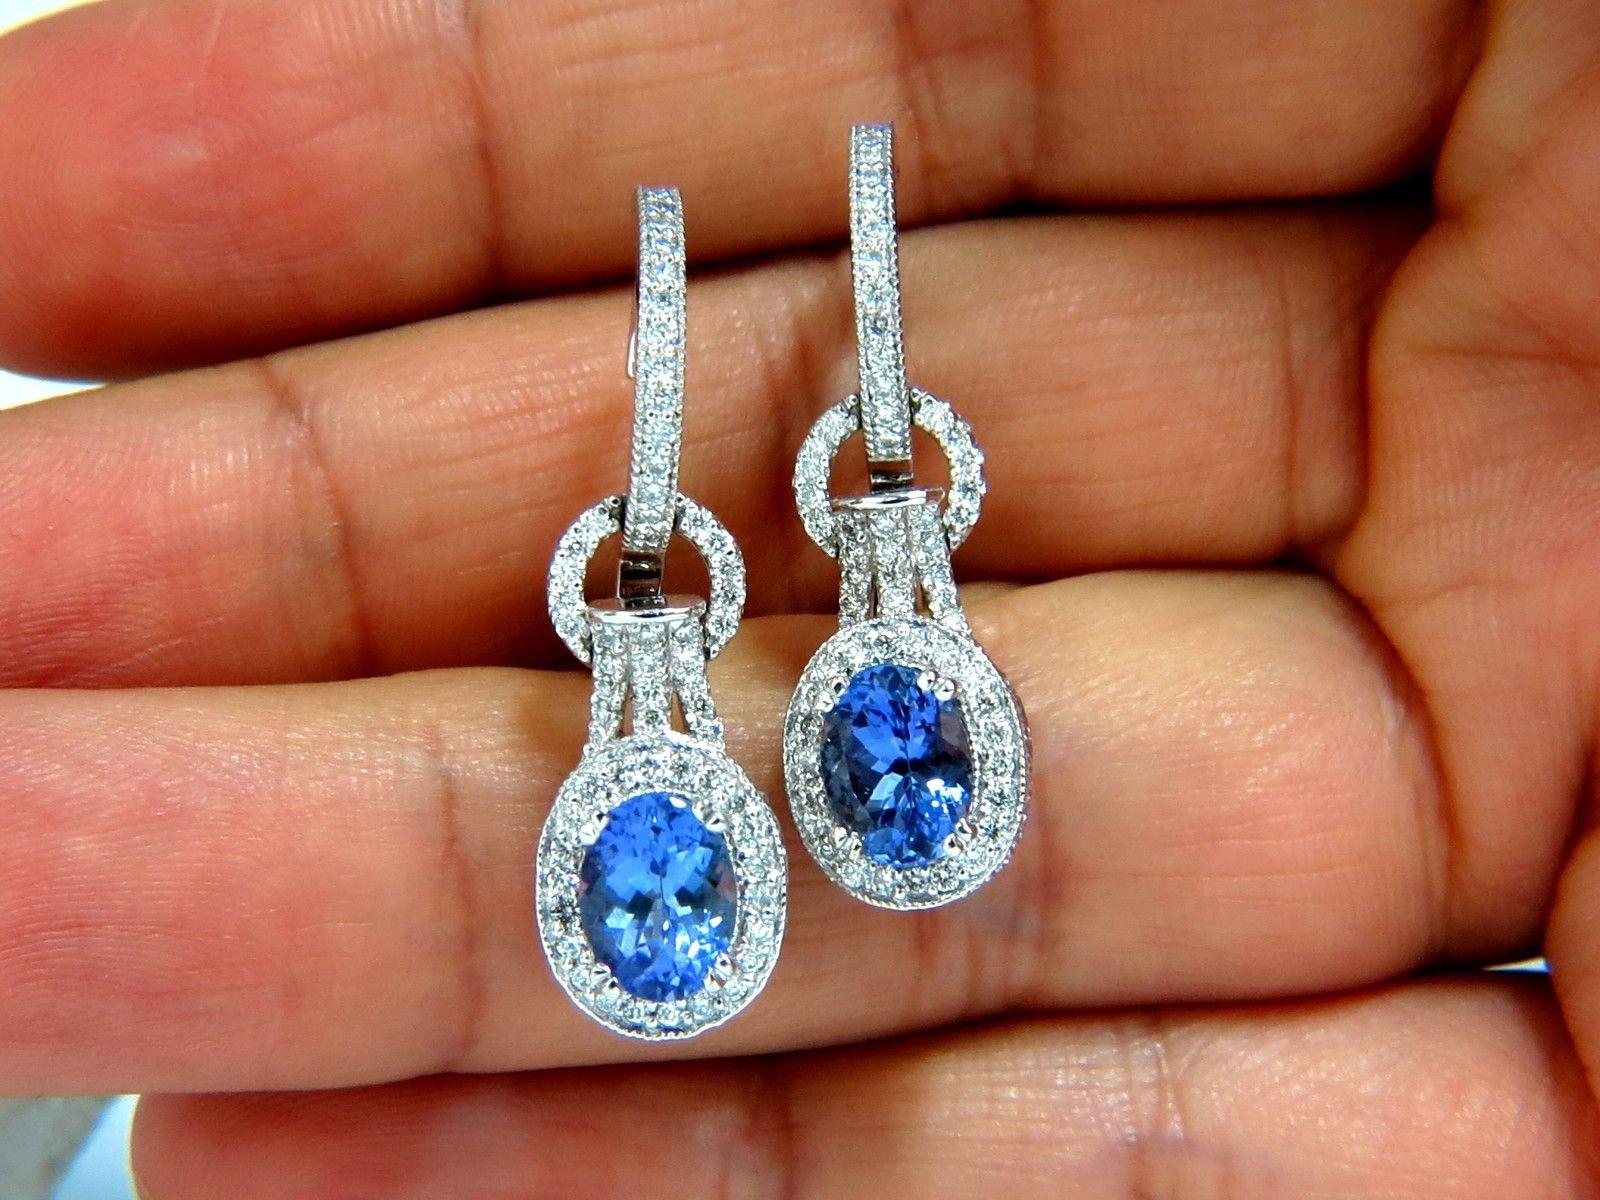 Tanzanite Dangle.

2.14ct natural oval tanzanites

Clean Clarity & Transparent

8 X 6mm each

1.26ct. Natural diamonds  

Rounds, Full cut brilliants.

G- color Vs-2 Clarity. 

Comfortable hoops, and secure snap

Excellent detail.

14kt. white